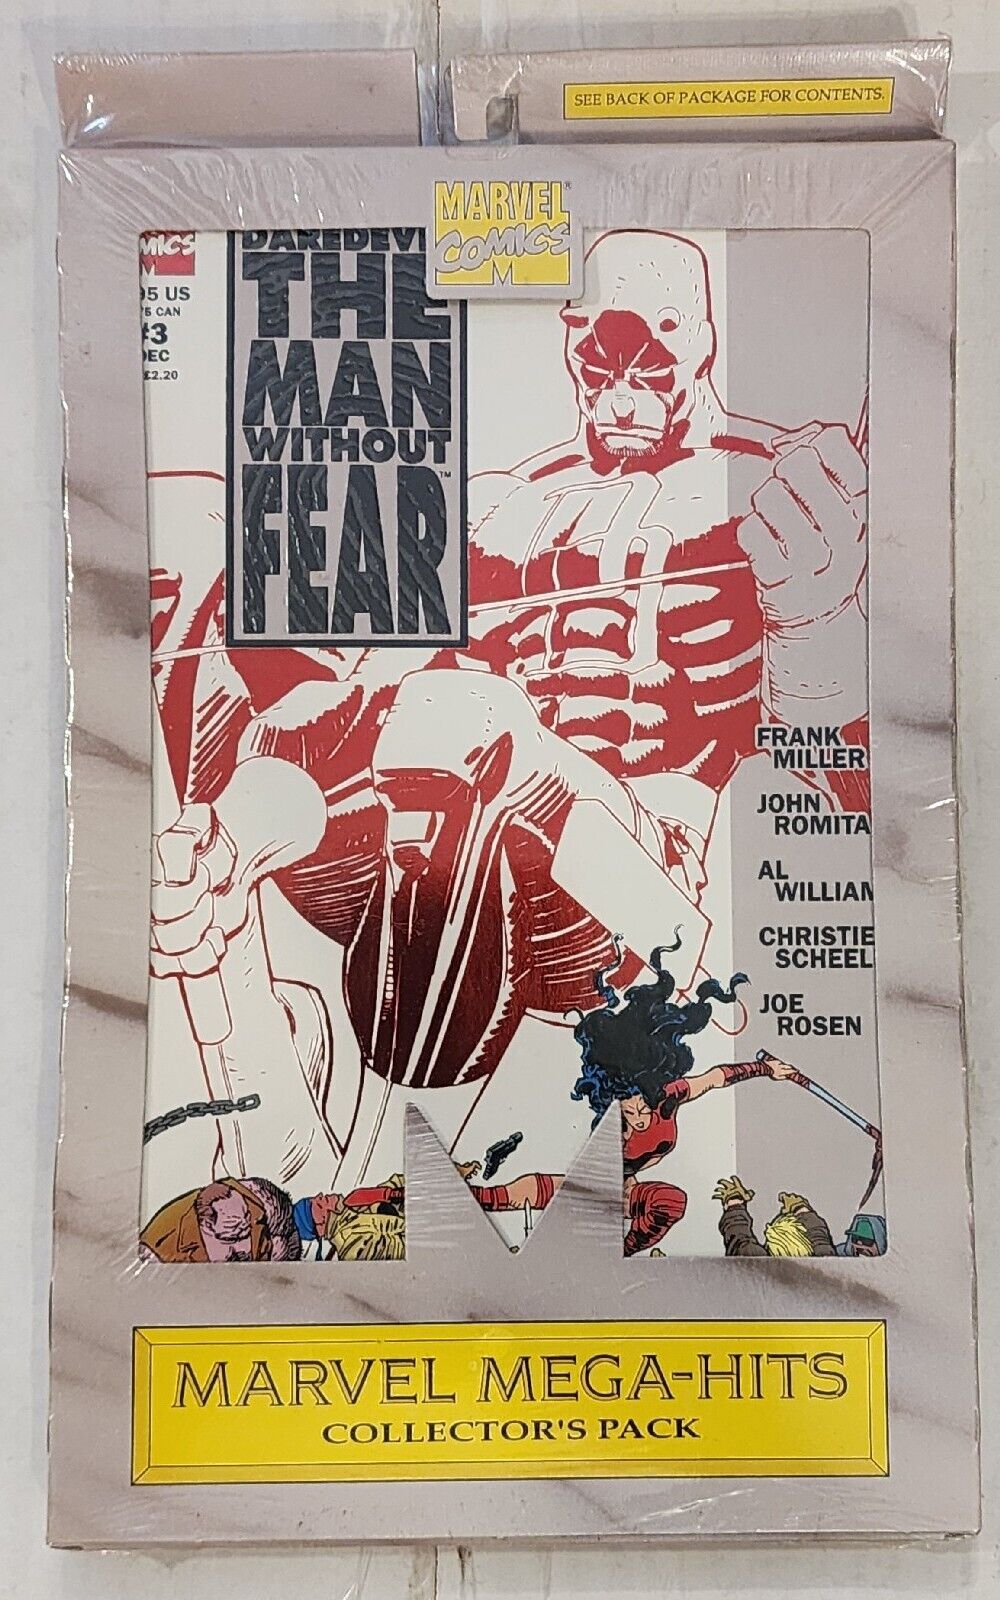 Marvel Mega-Hits Collectors Pack - Daredevil: Man Without Fear #1-5 (1993) <OXB-02>